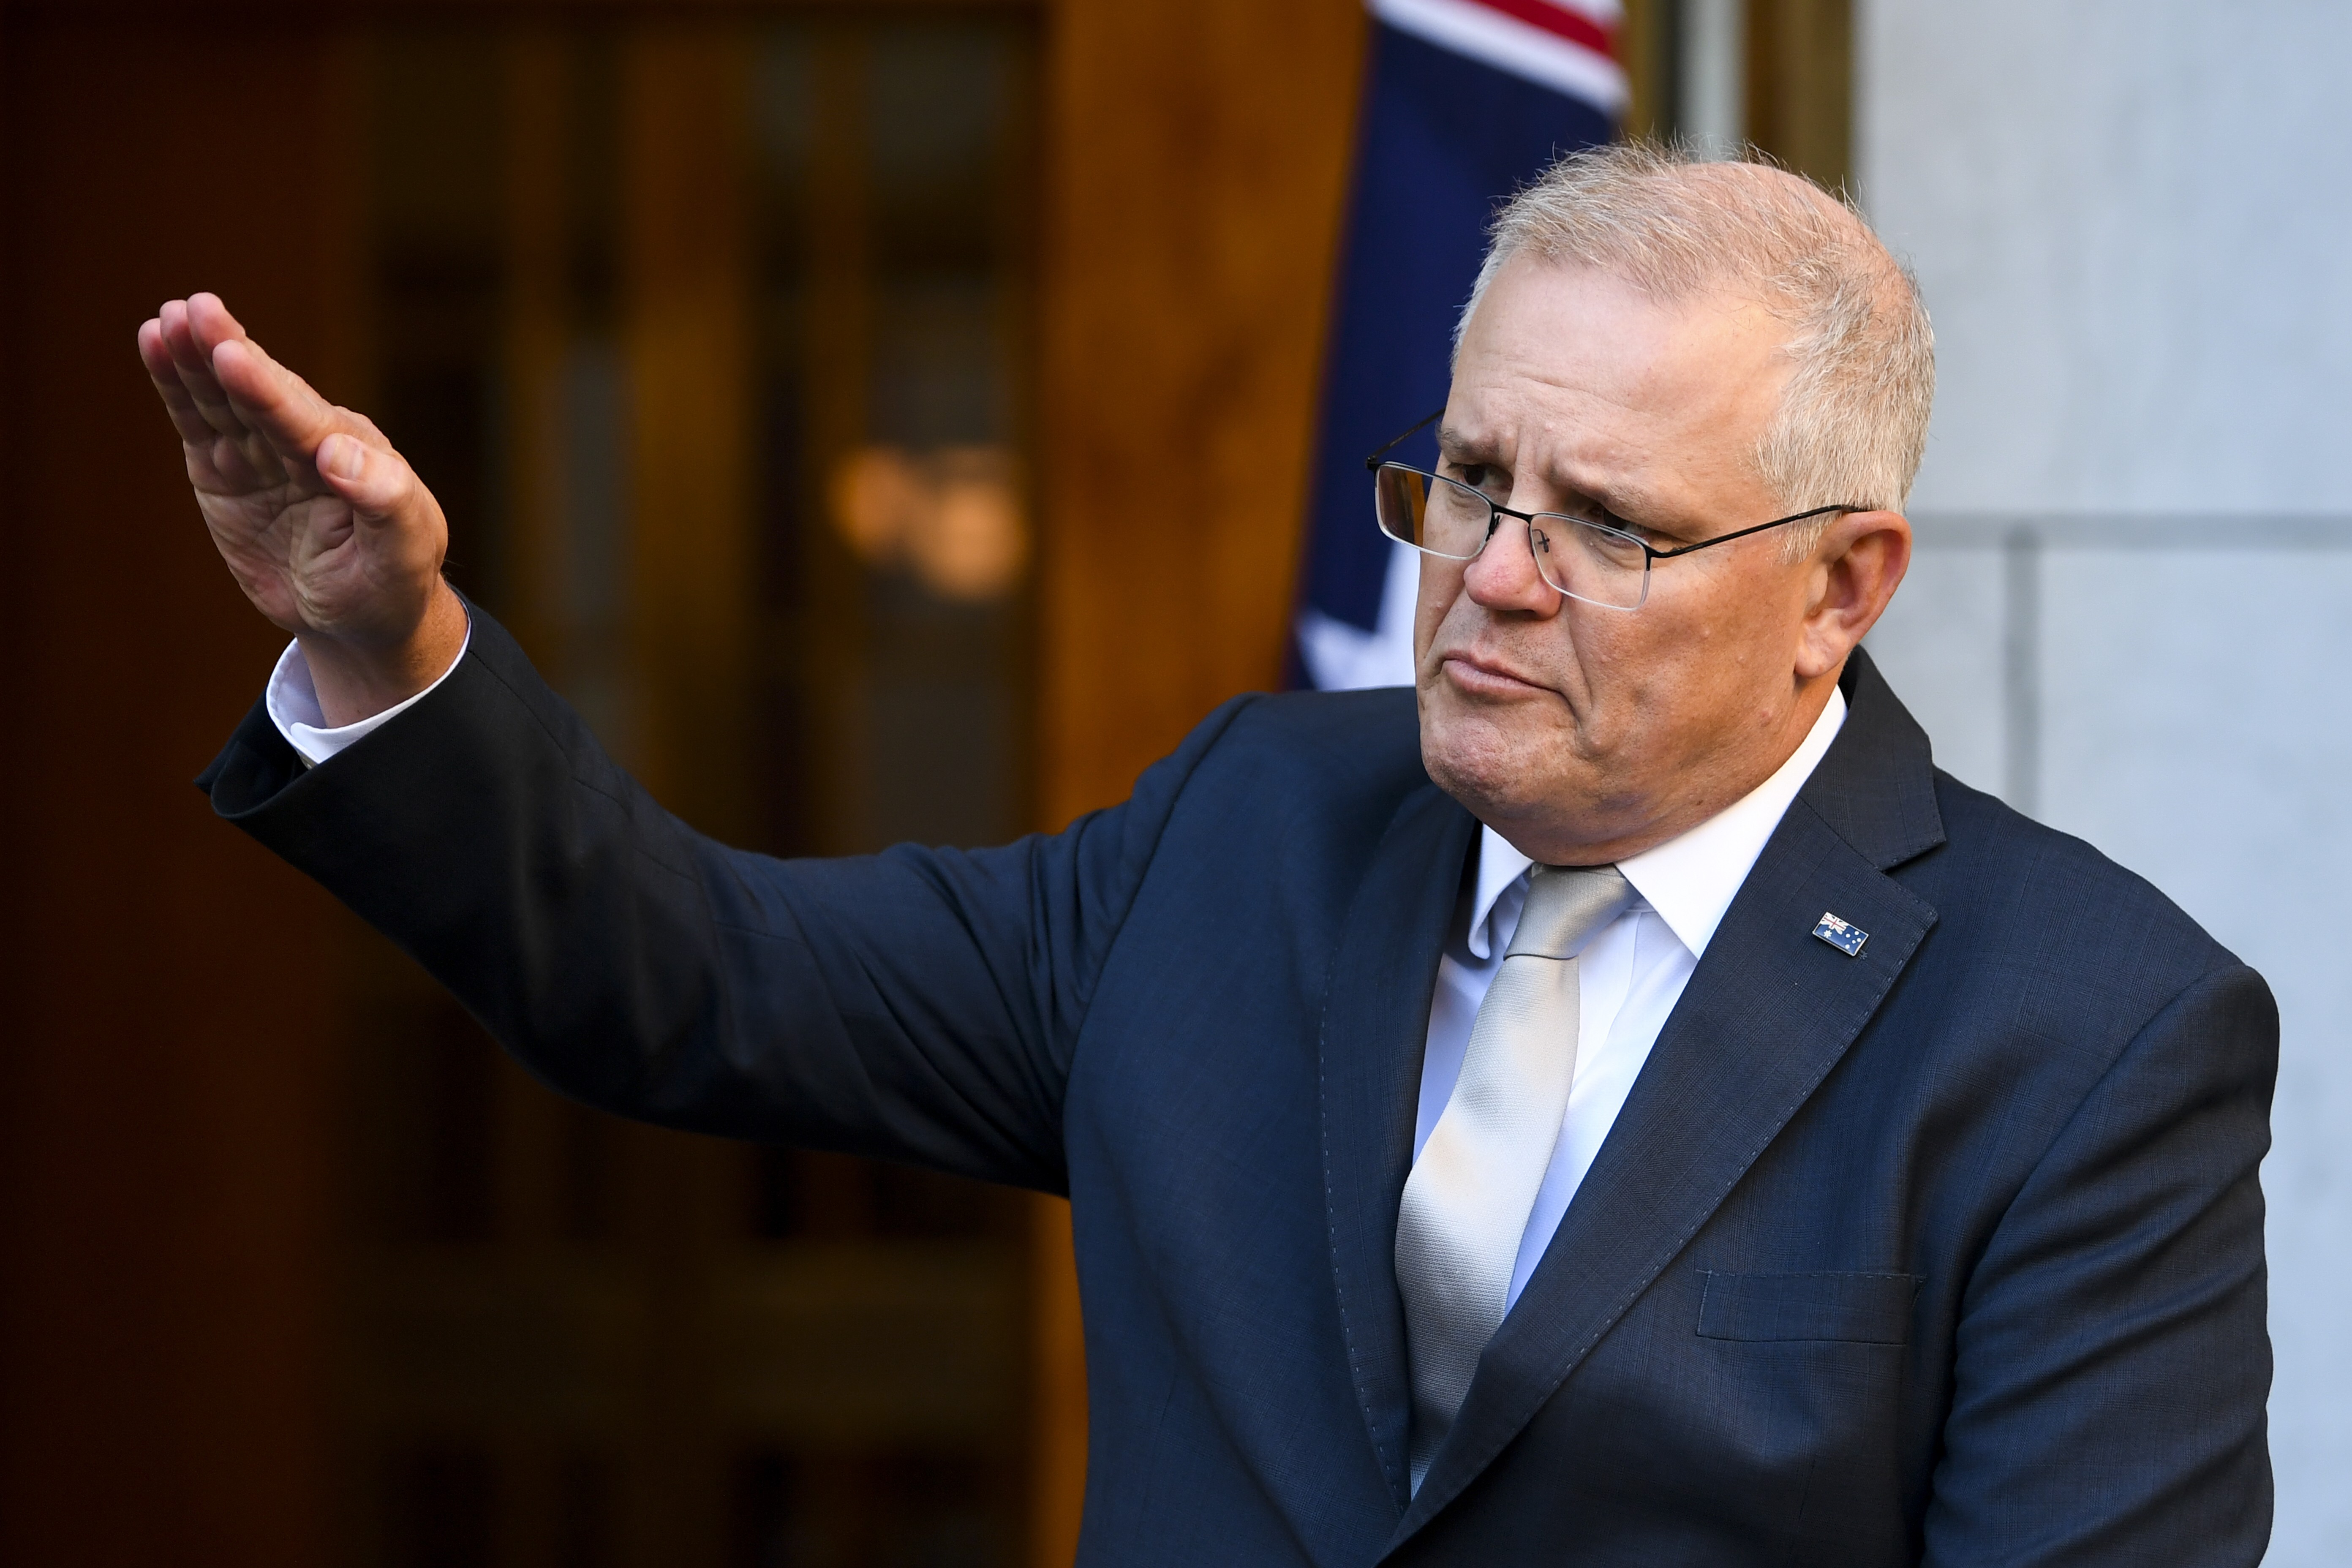 Australian Prime Minister Scott Morrison has stood by his decision to ban travel from India, despite warnings and criticism from doctors, human rights groups and the Indian-Australian community. Photo: AAP Image via DPA